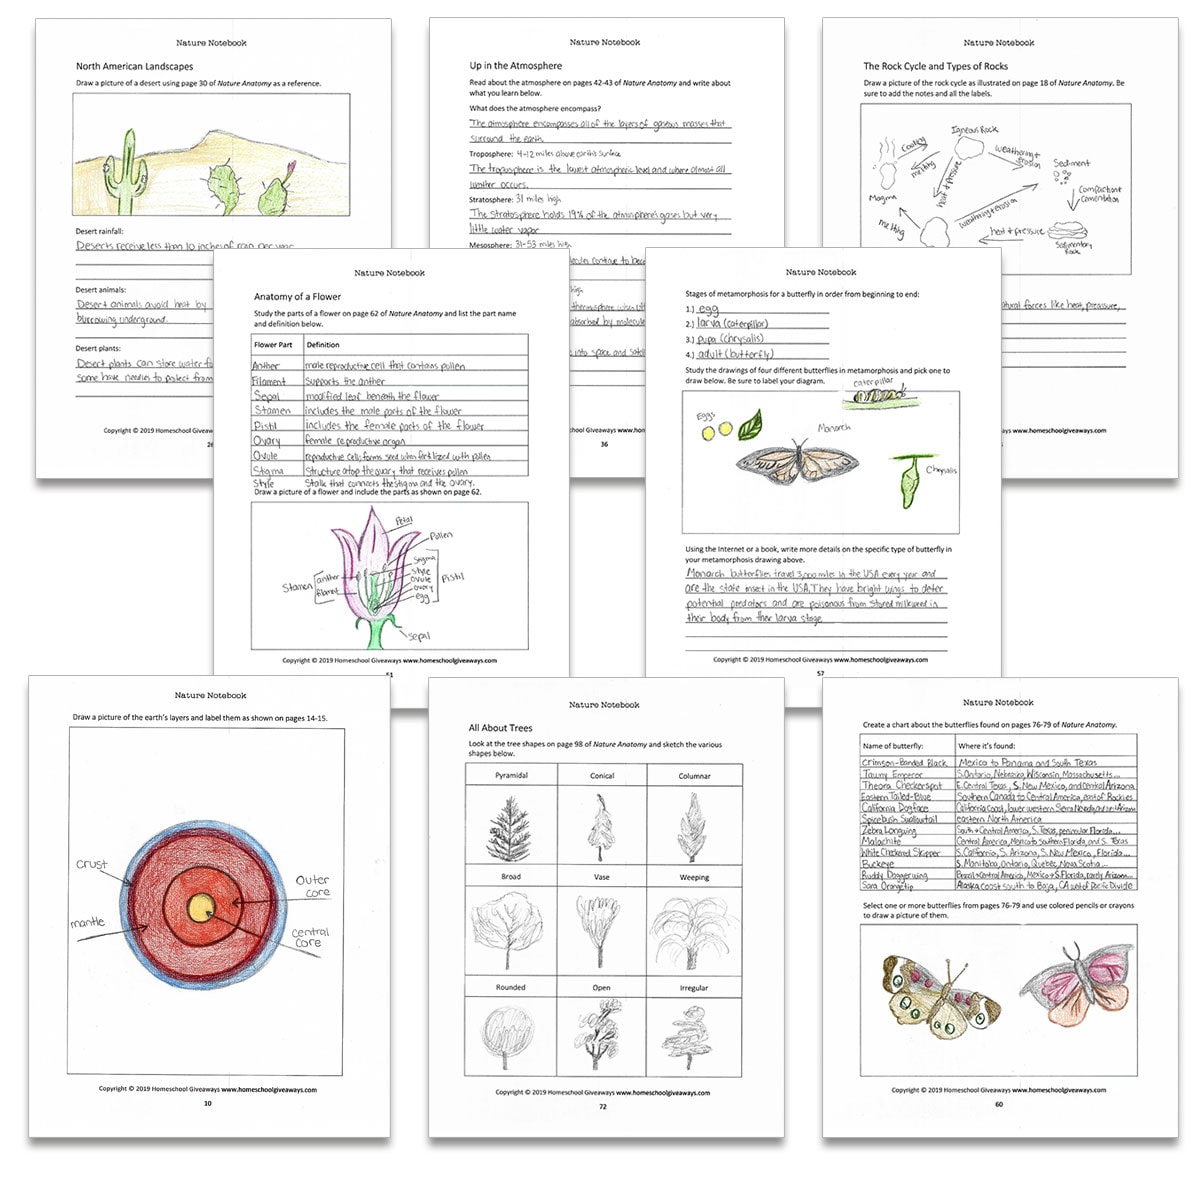 Student's notebooking pages from the Nature Notebook, a Notebook Companion™ for Nature Anatomy by Julia Rothman